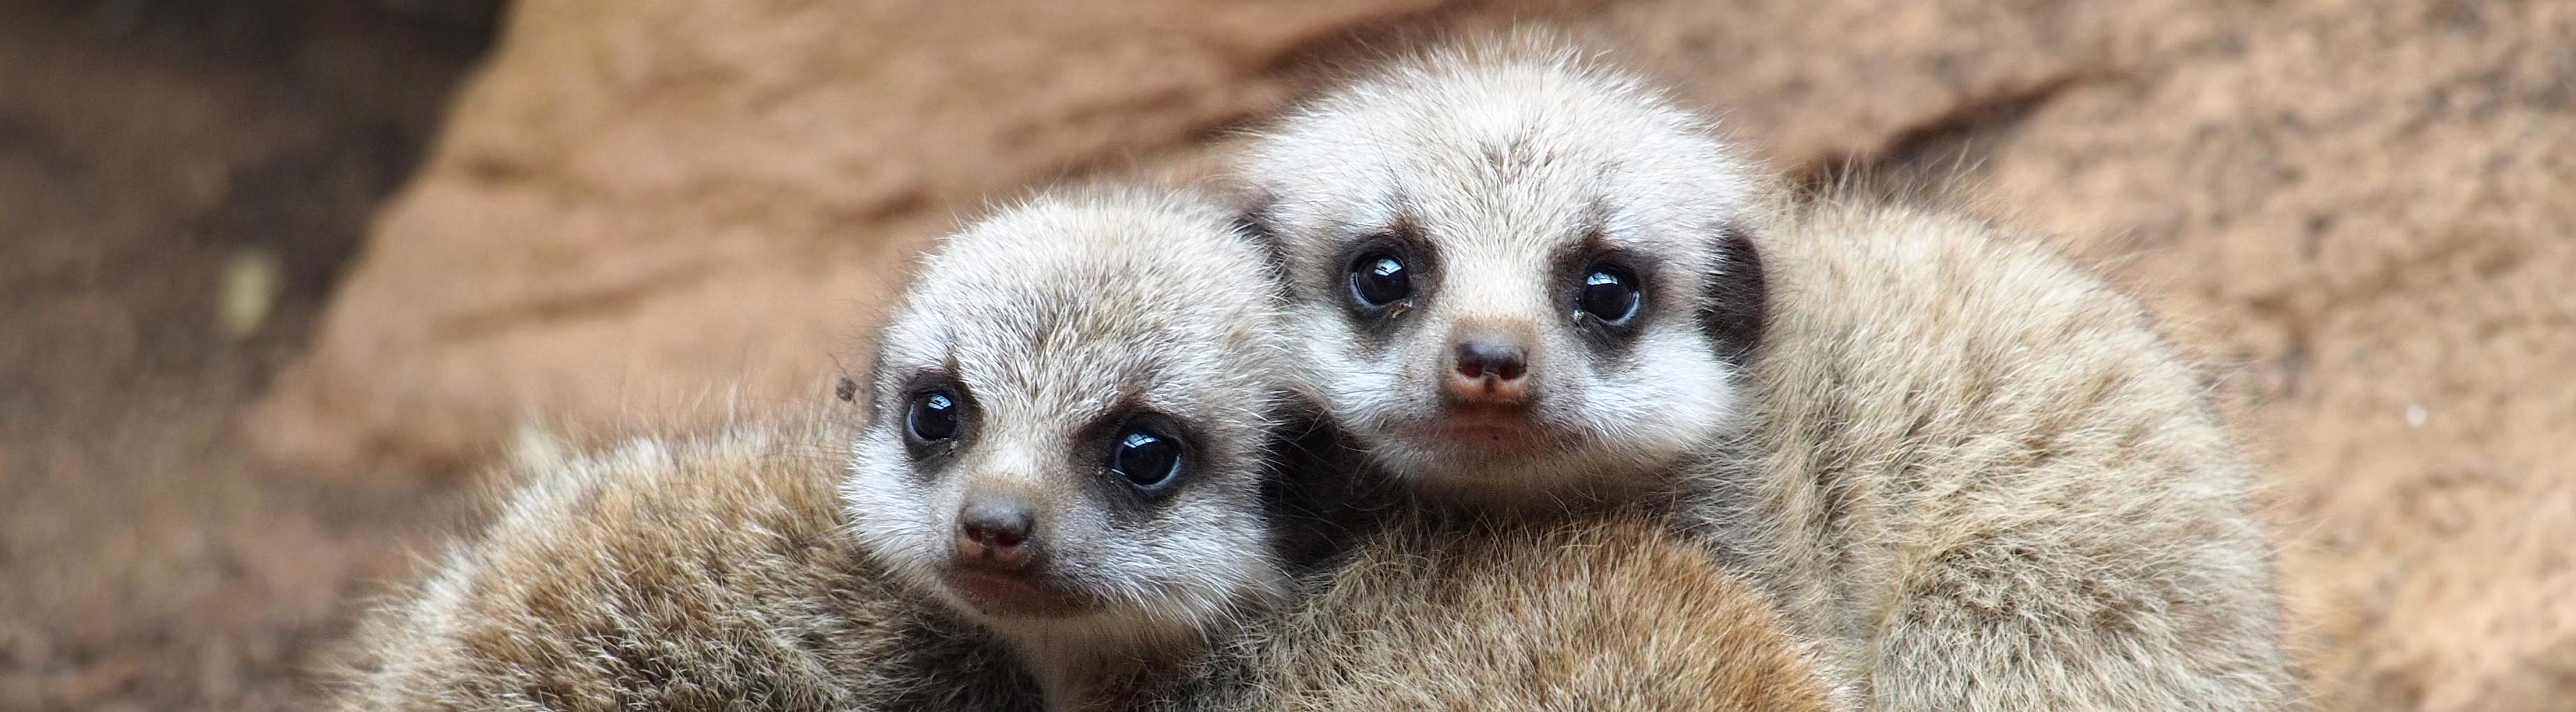 Meerkat facts and habits